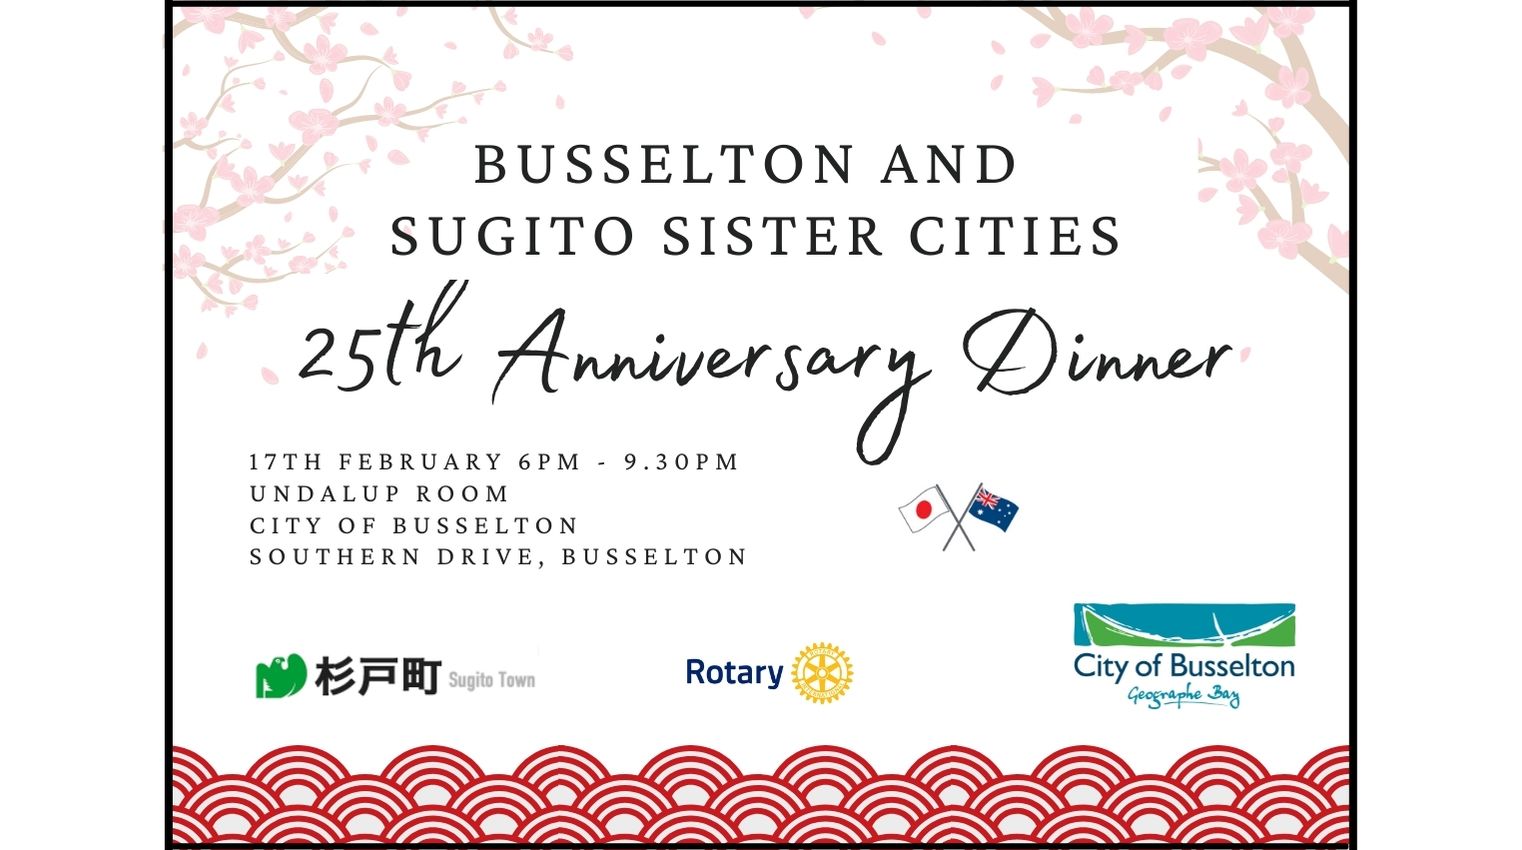 Busselton and Sugito Sister Cities - 25th Anniversary Dinner